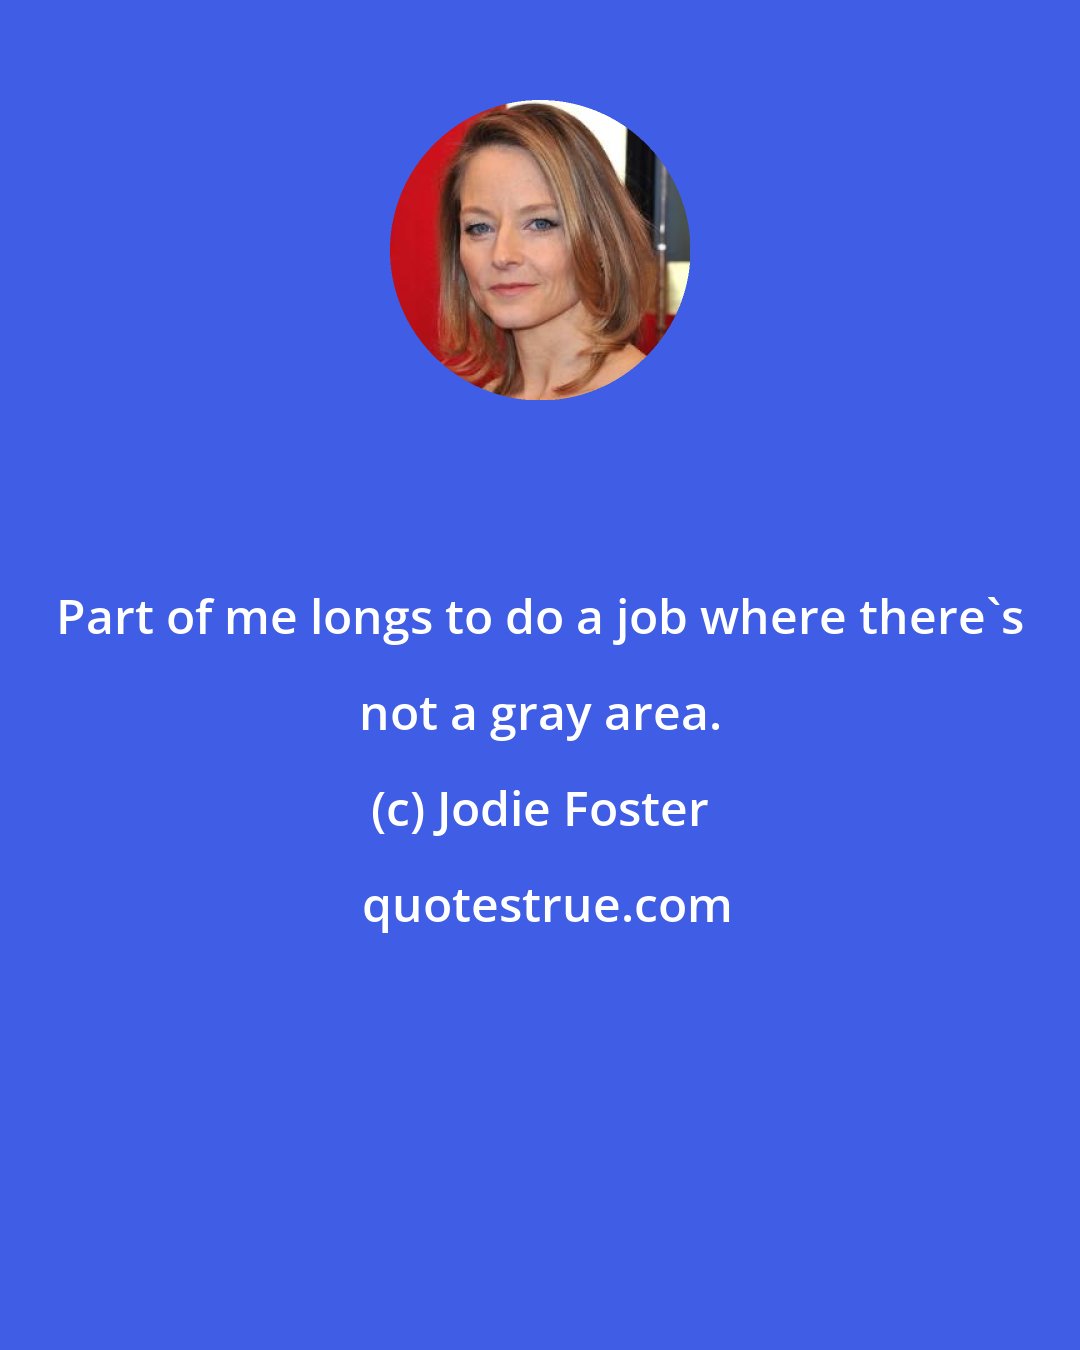 Jodie Foster: Part of me longs to do a job where there's not a gray area.